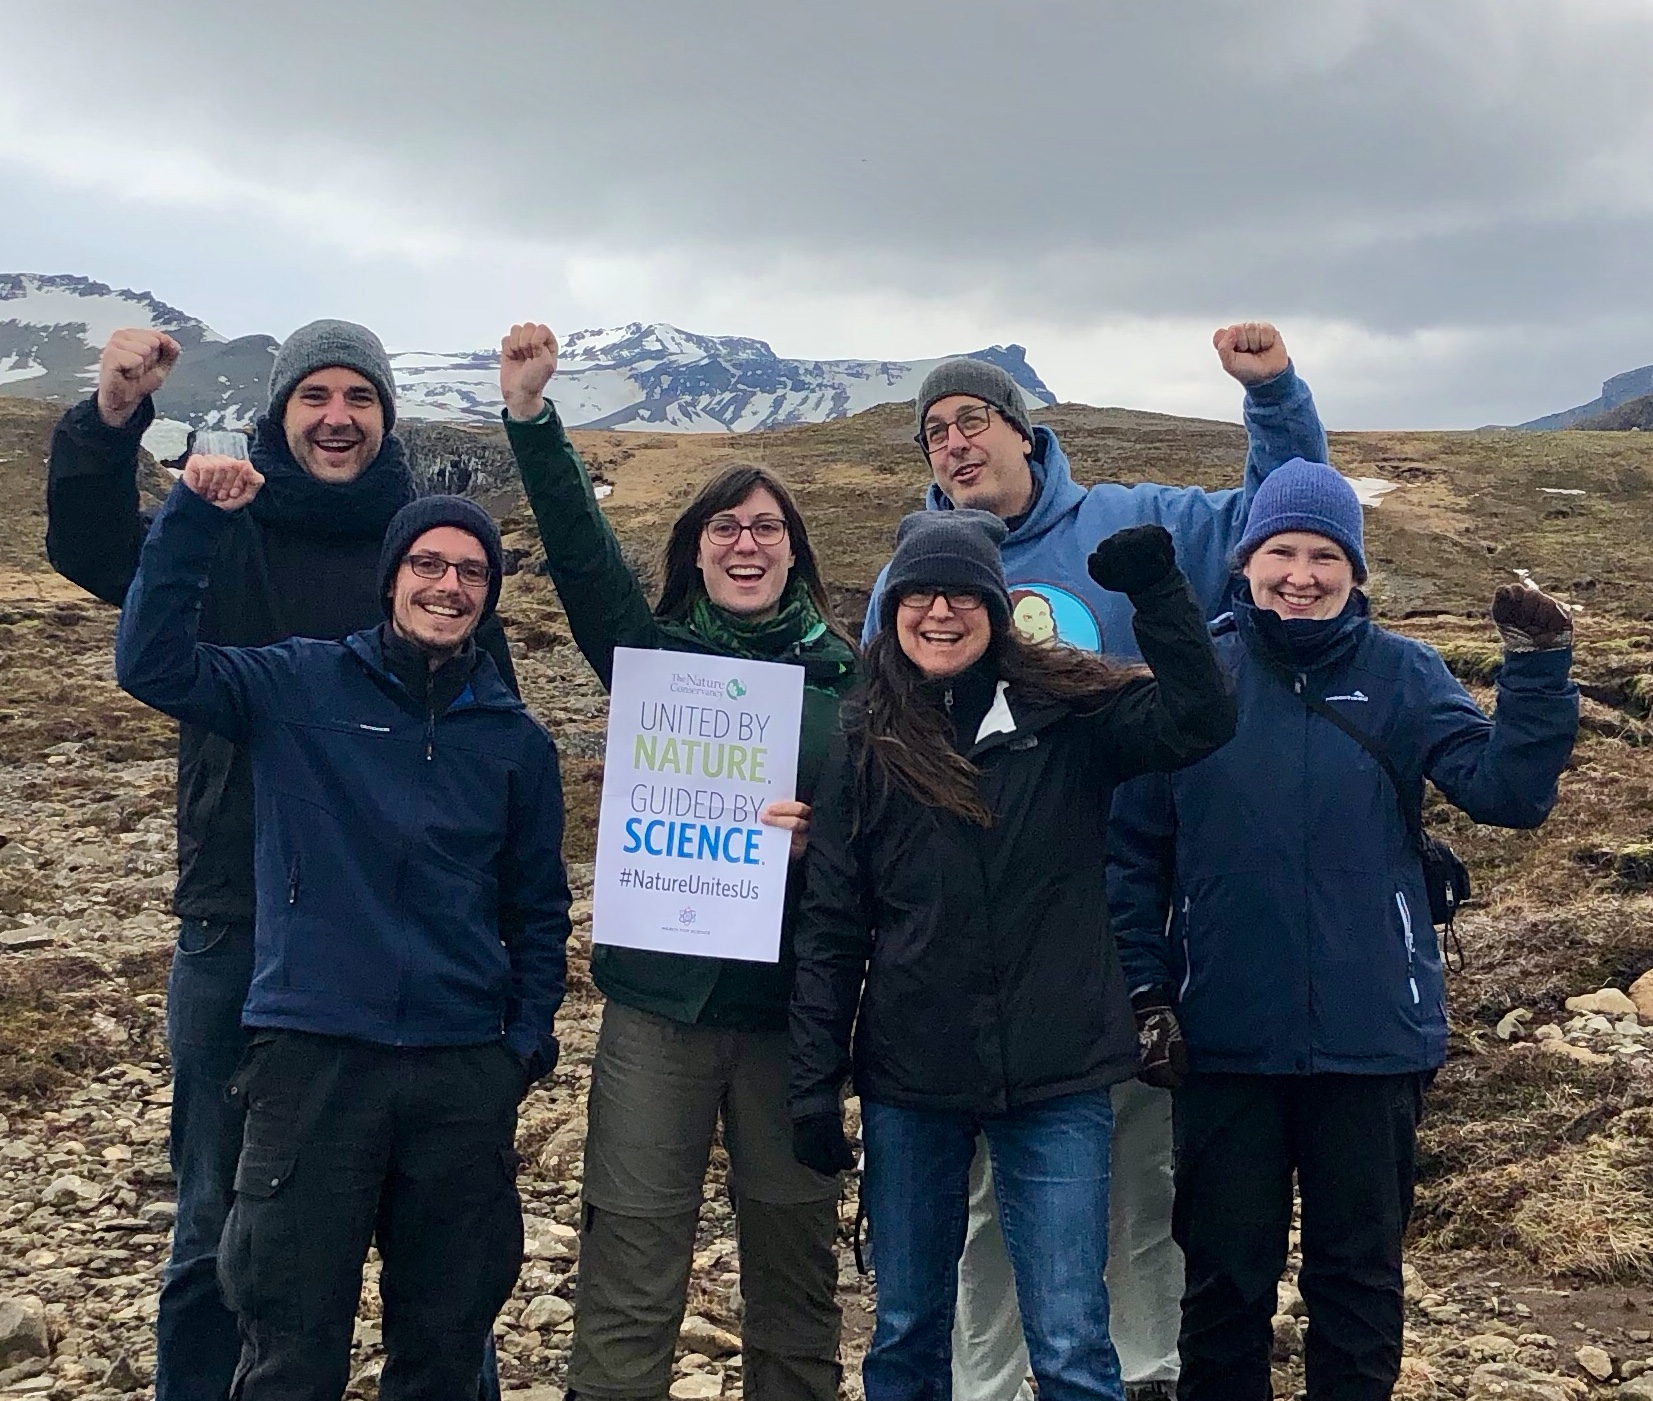 Our celebration of science spanned from WA to Iceland!